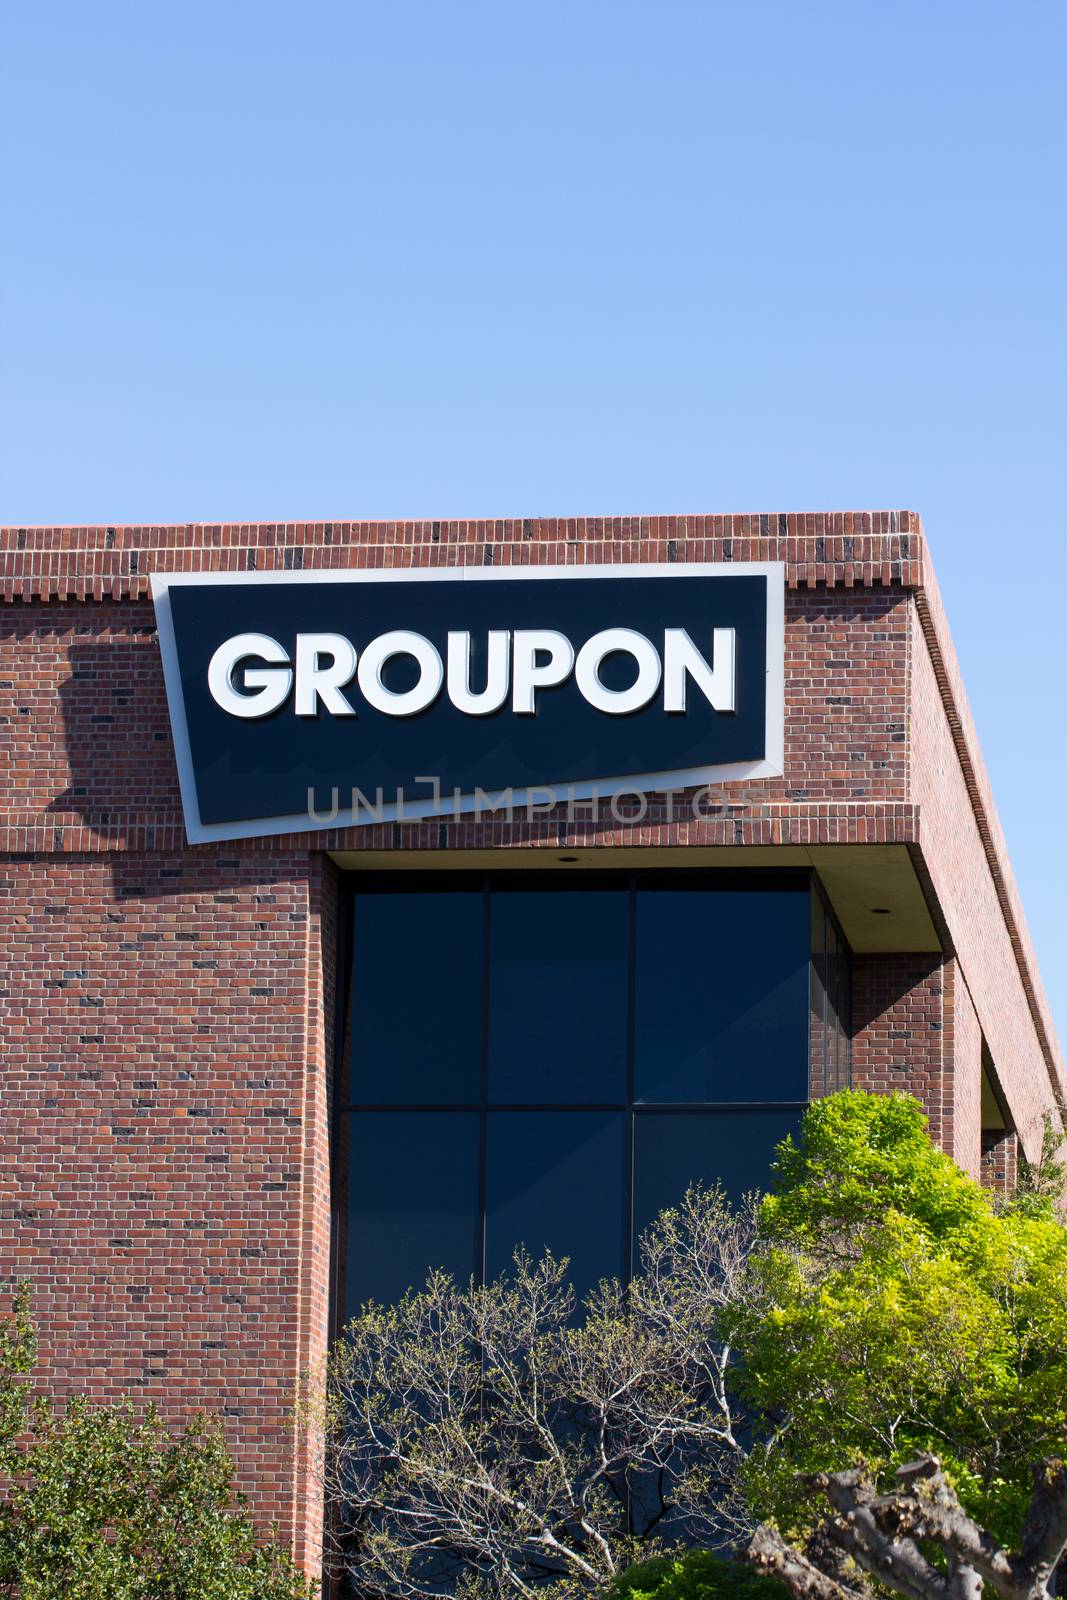 Groupon offices in Silicon Valley by wolterk